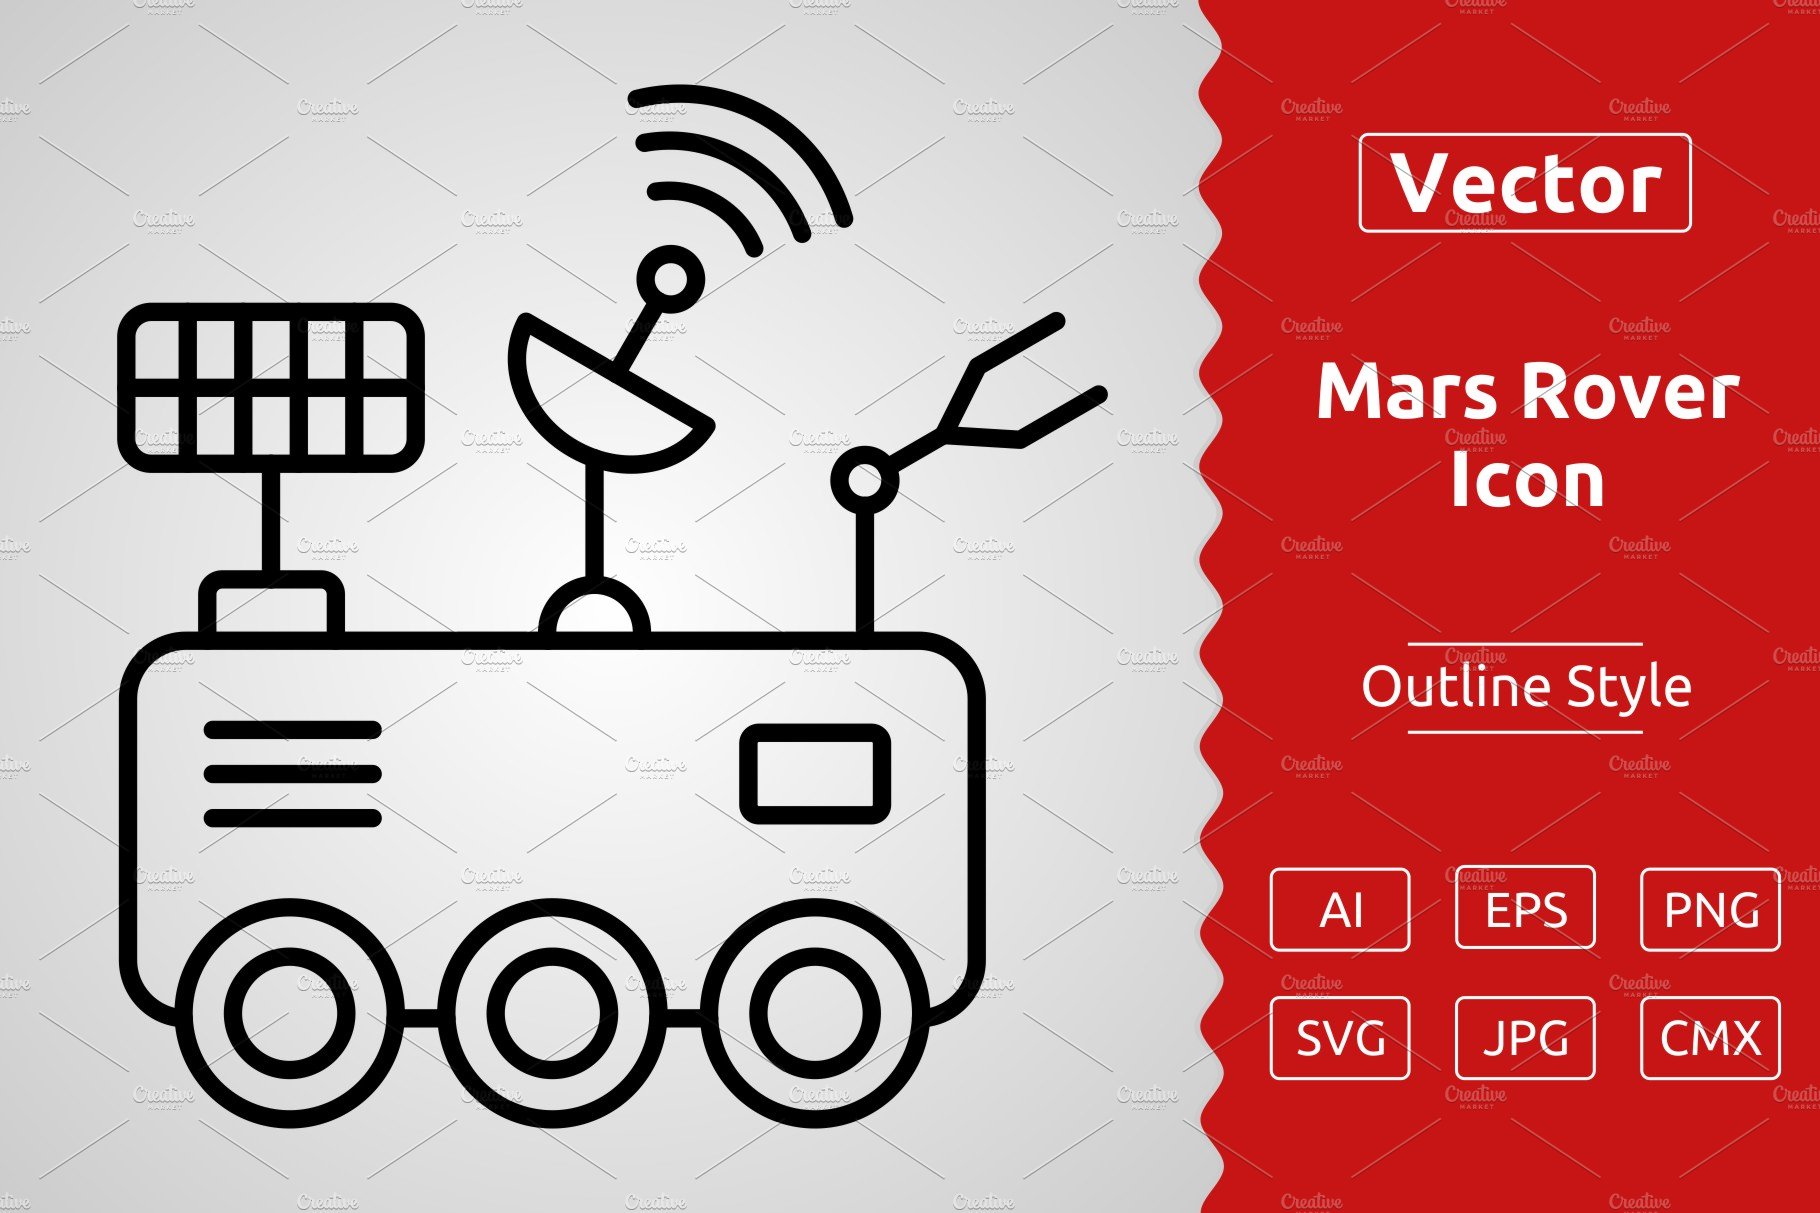 Vector Mars Rover Outline Icon cover image.